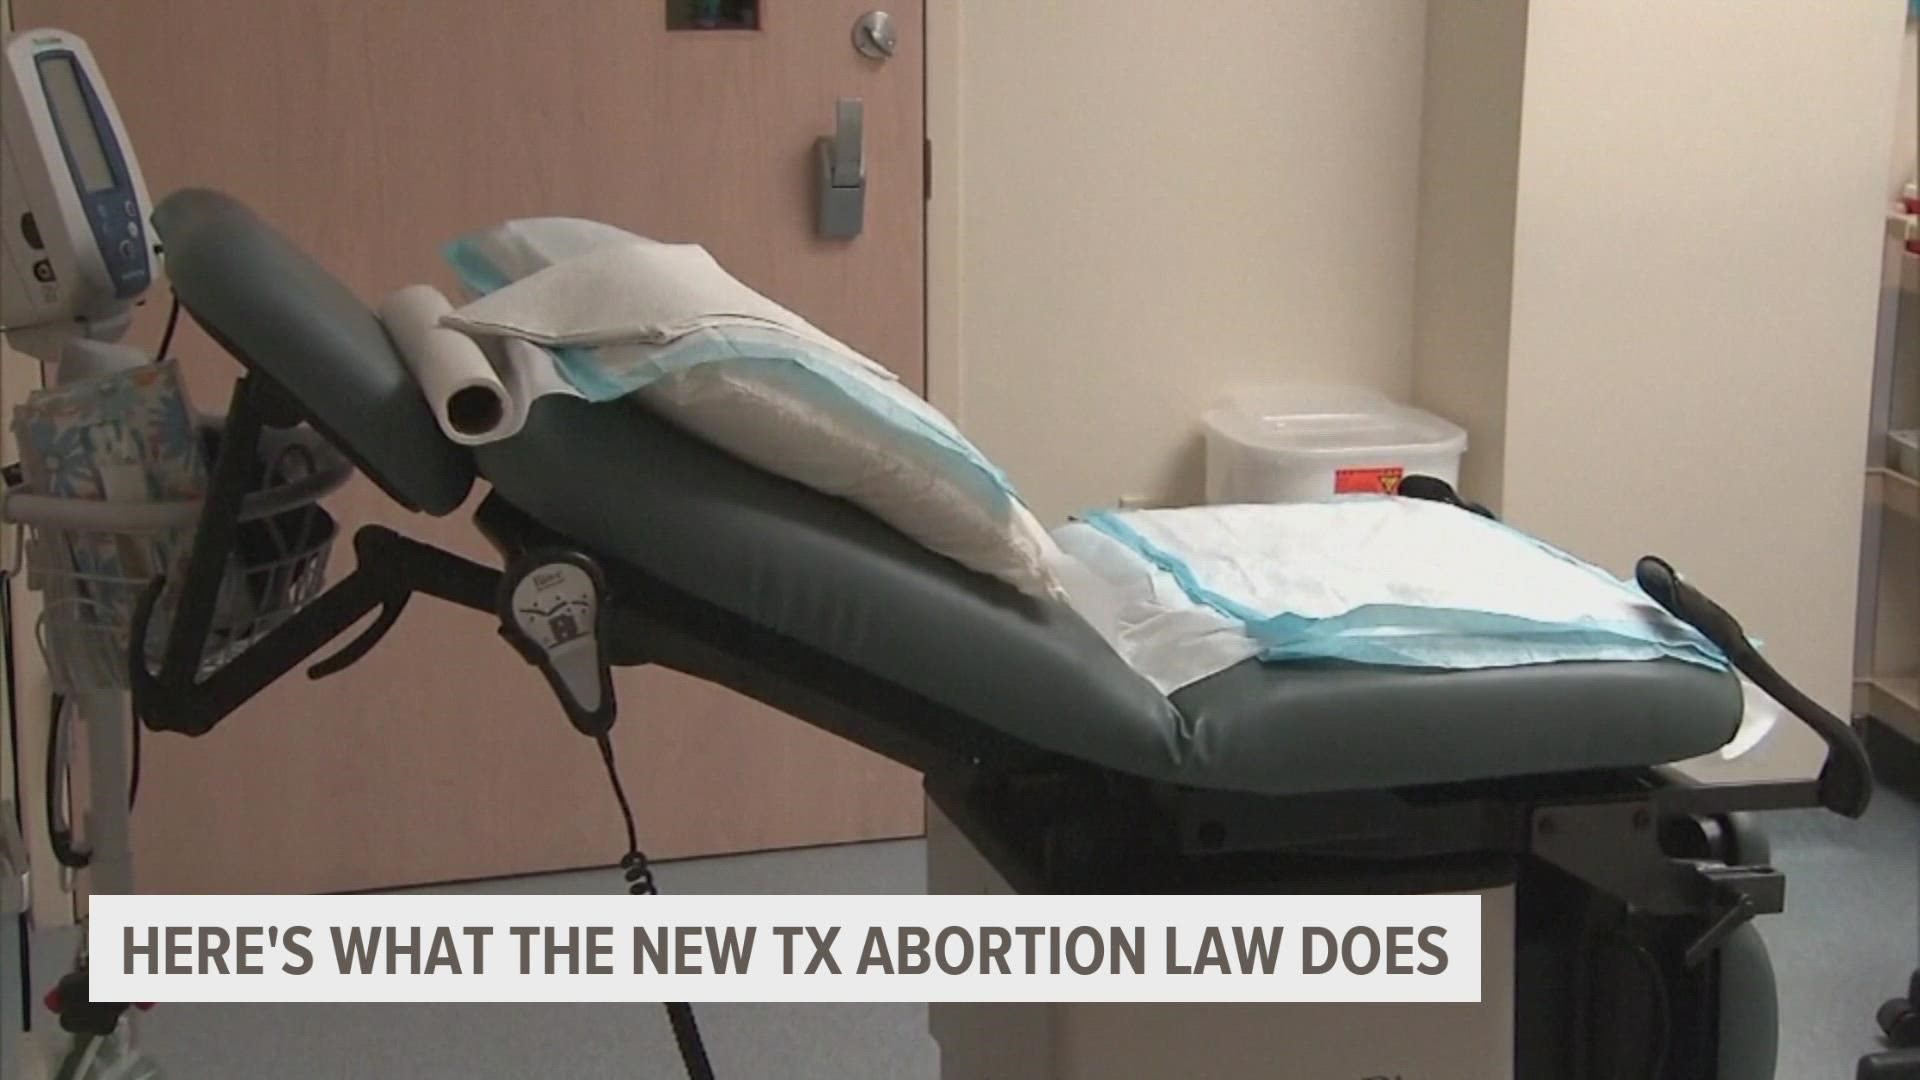 Iowa lawmakers have been working to further restrict abortions in the state, including a 24-hour waiting period signed by Gov. Reynolds last year.